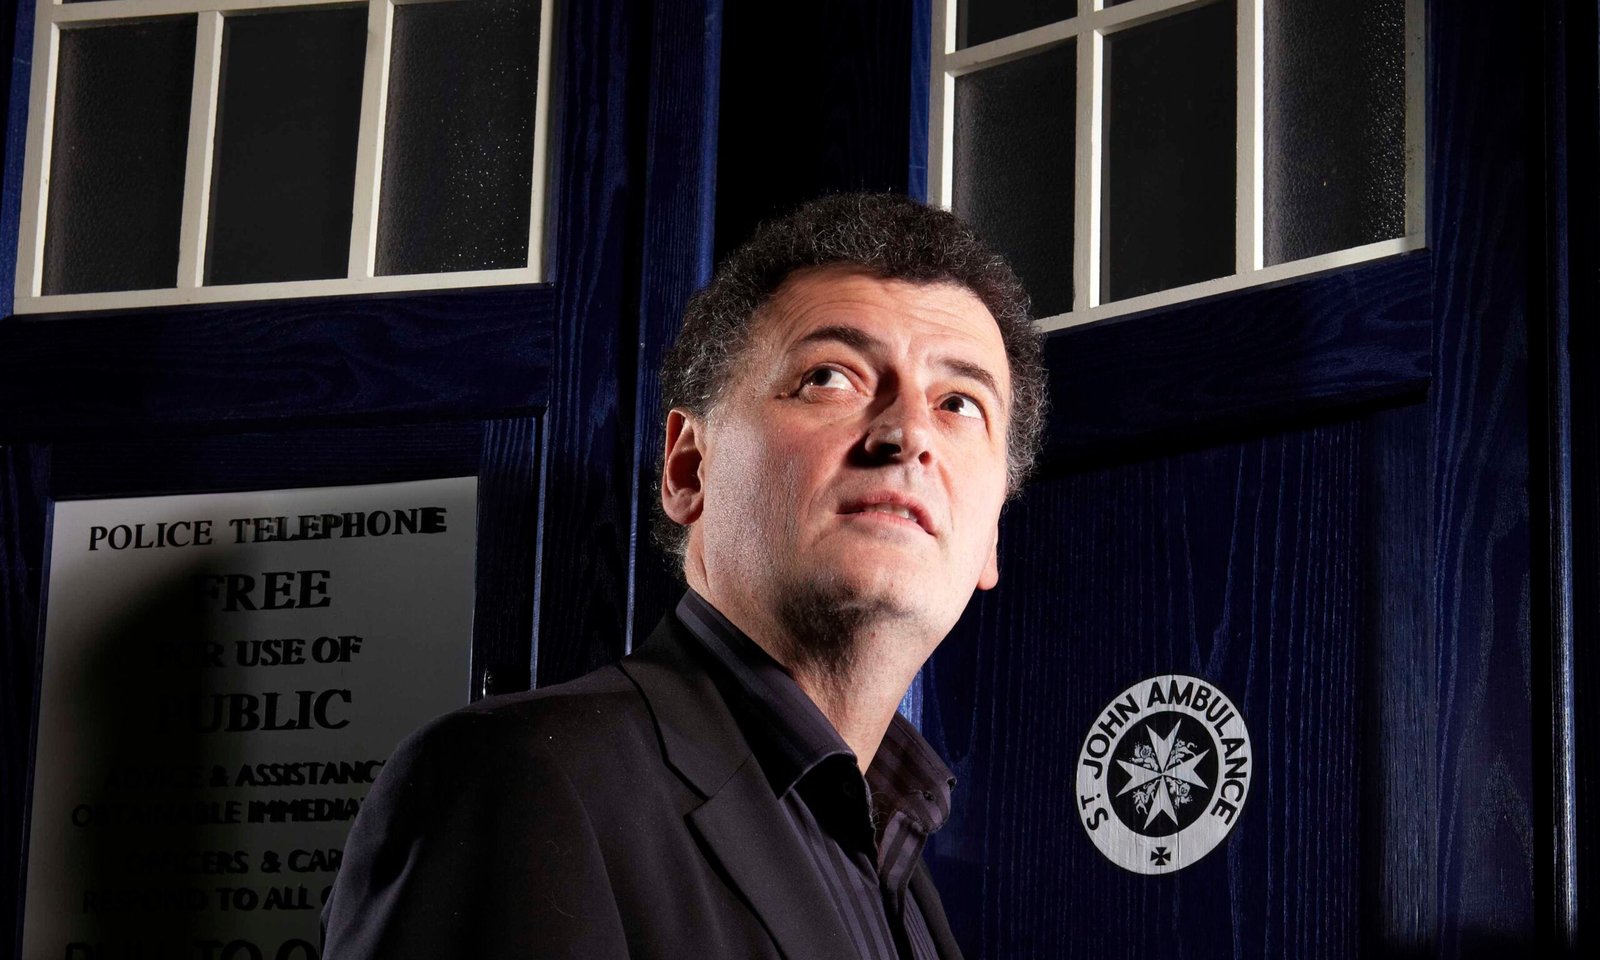 Steven Moffat Has Written This Year’s Doctor Who Christmas Special, Joy to the World